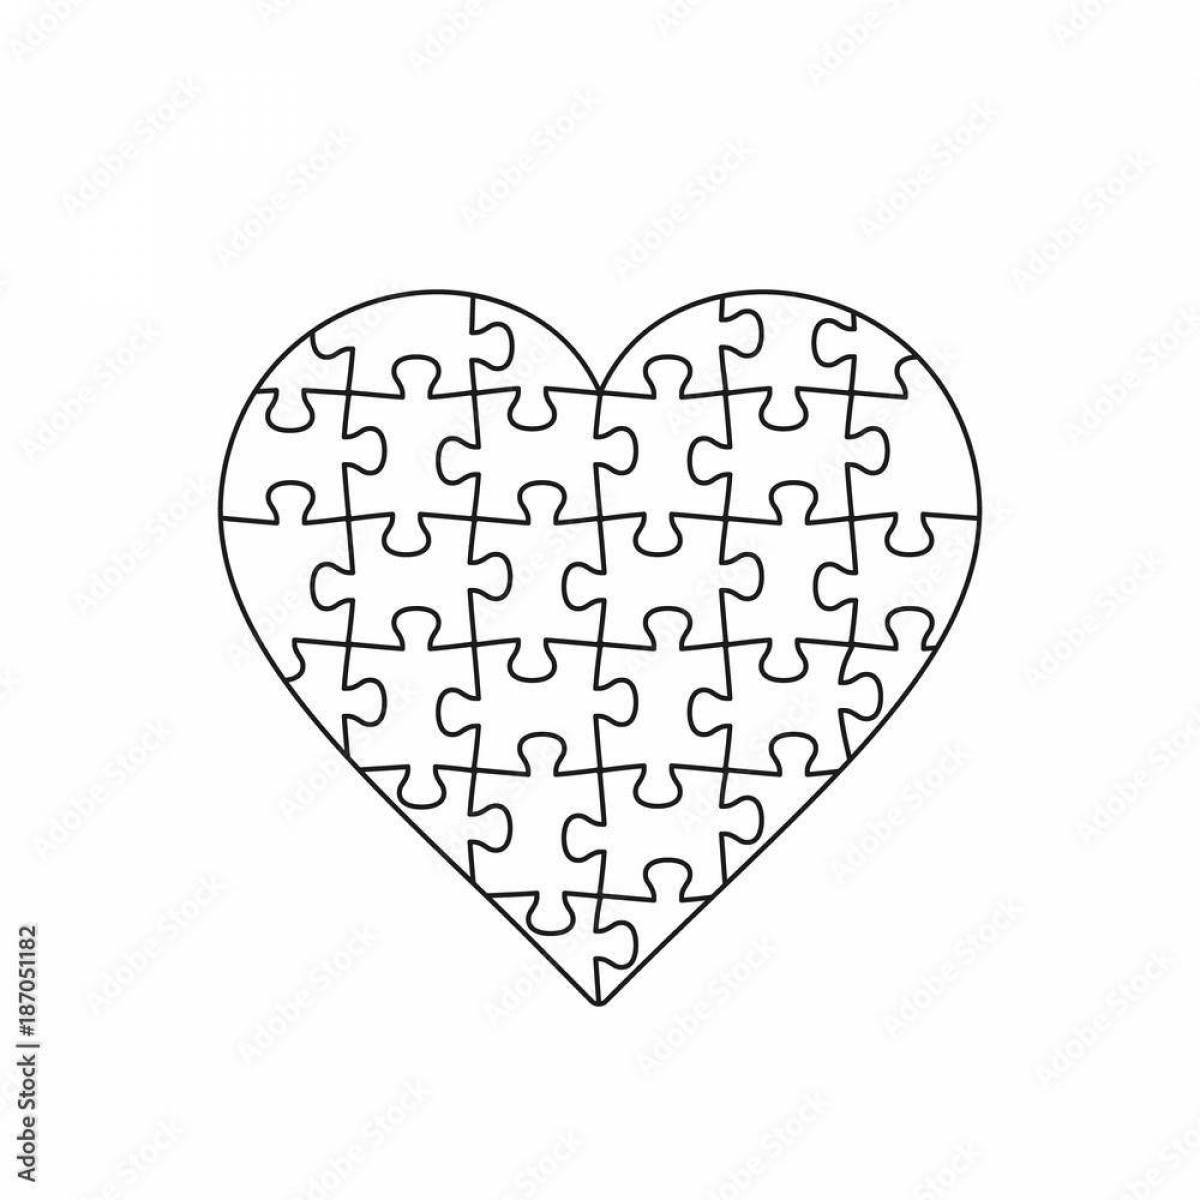 Exciting heart puzzle coloring book